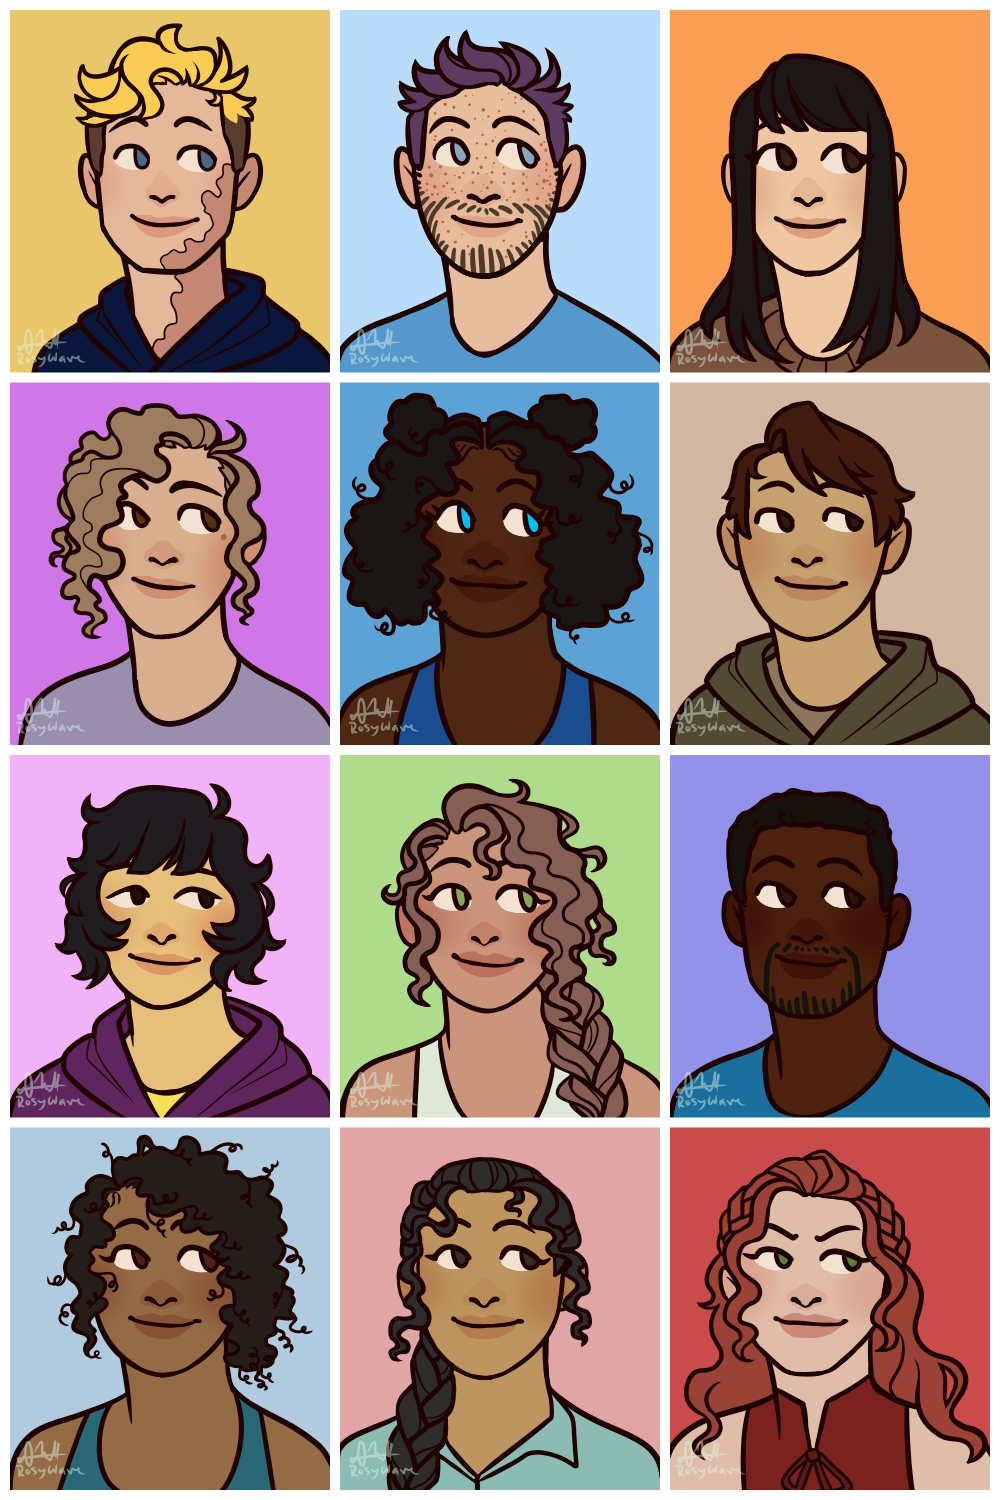 A set of twelve simple character portraits in a 3x4 grid.